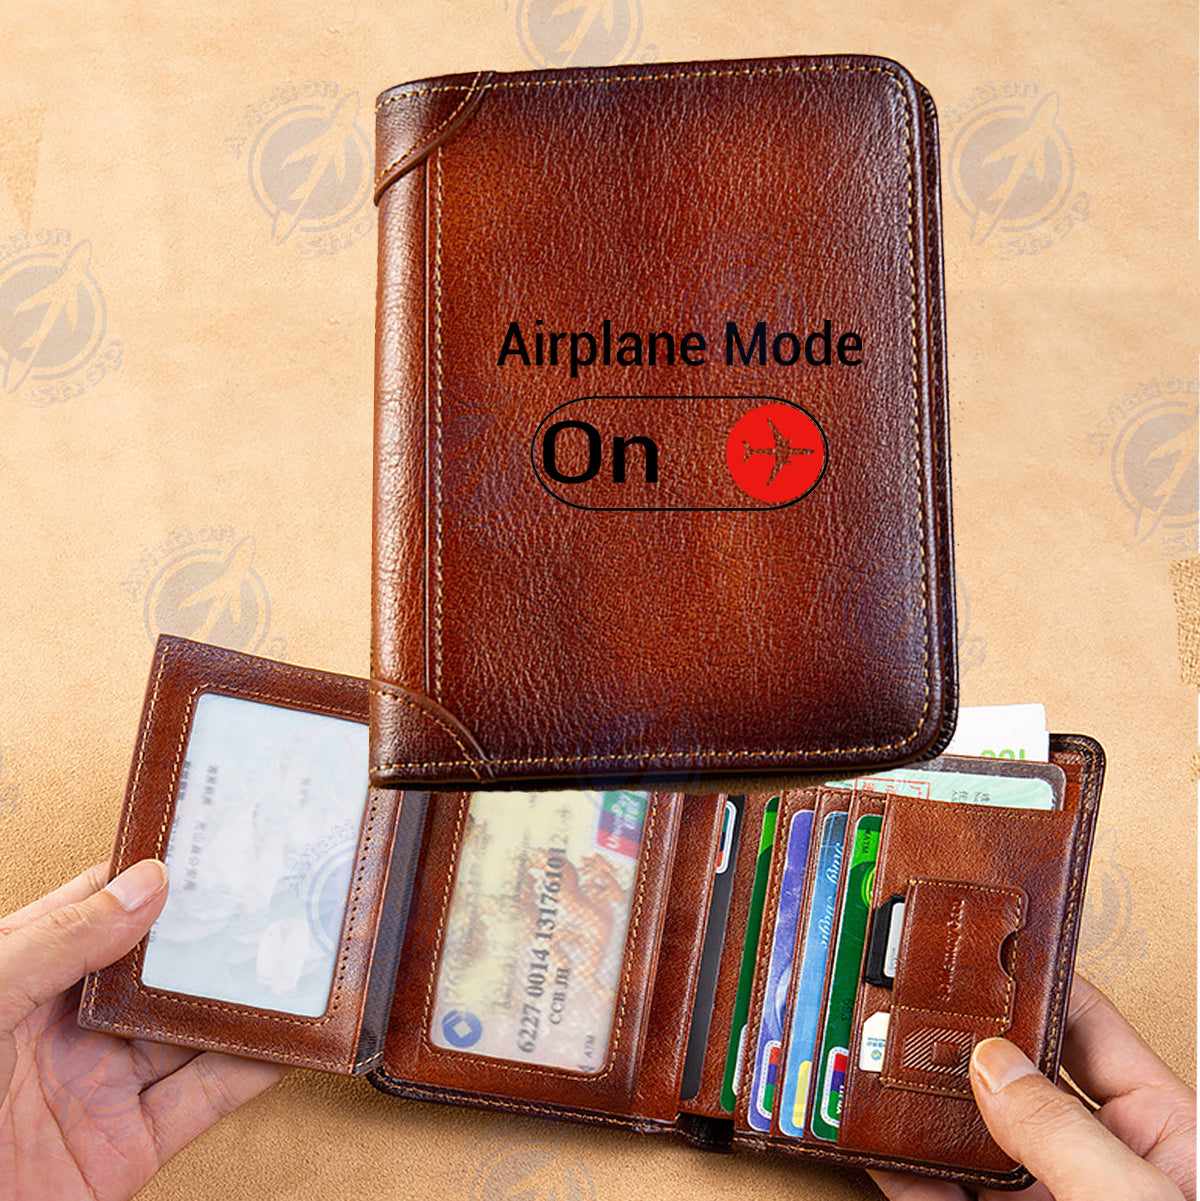 Airplane Mode On Designed Leather Wallets